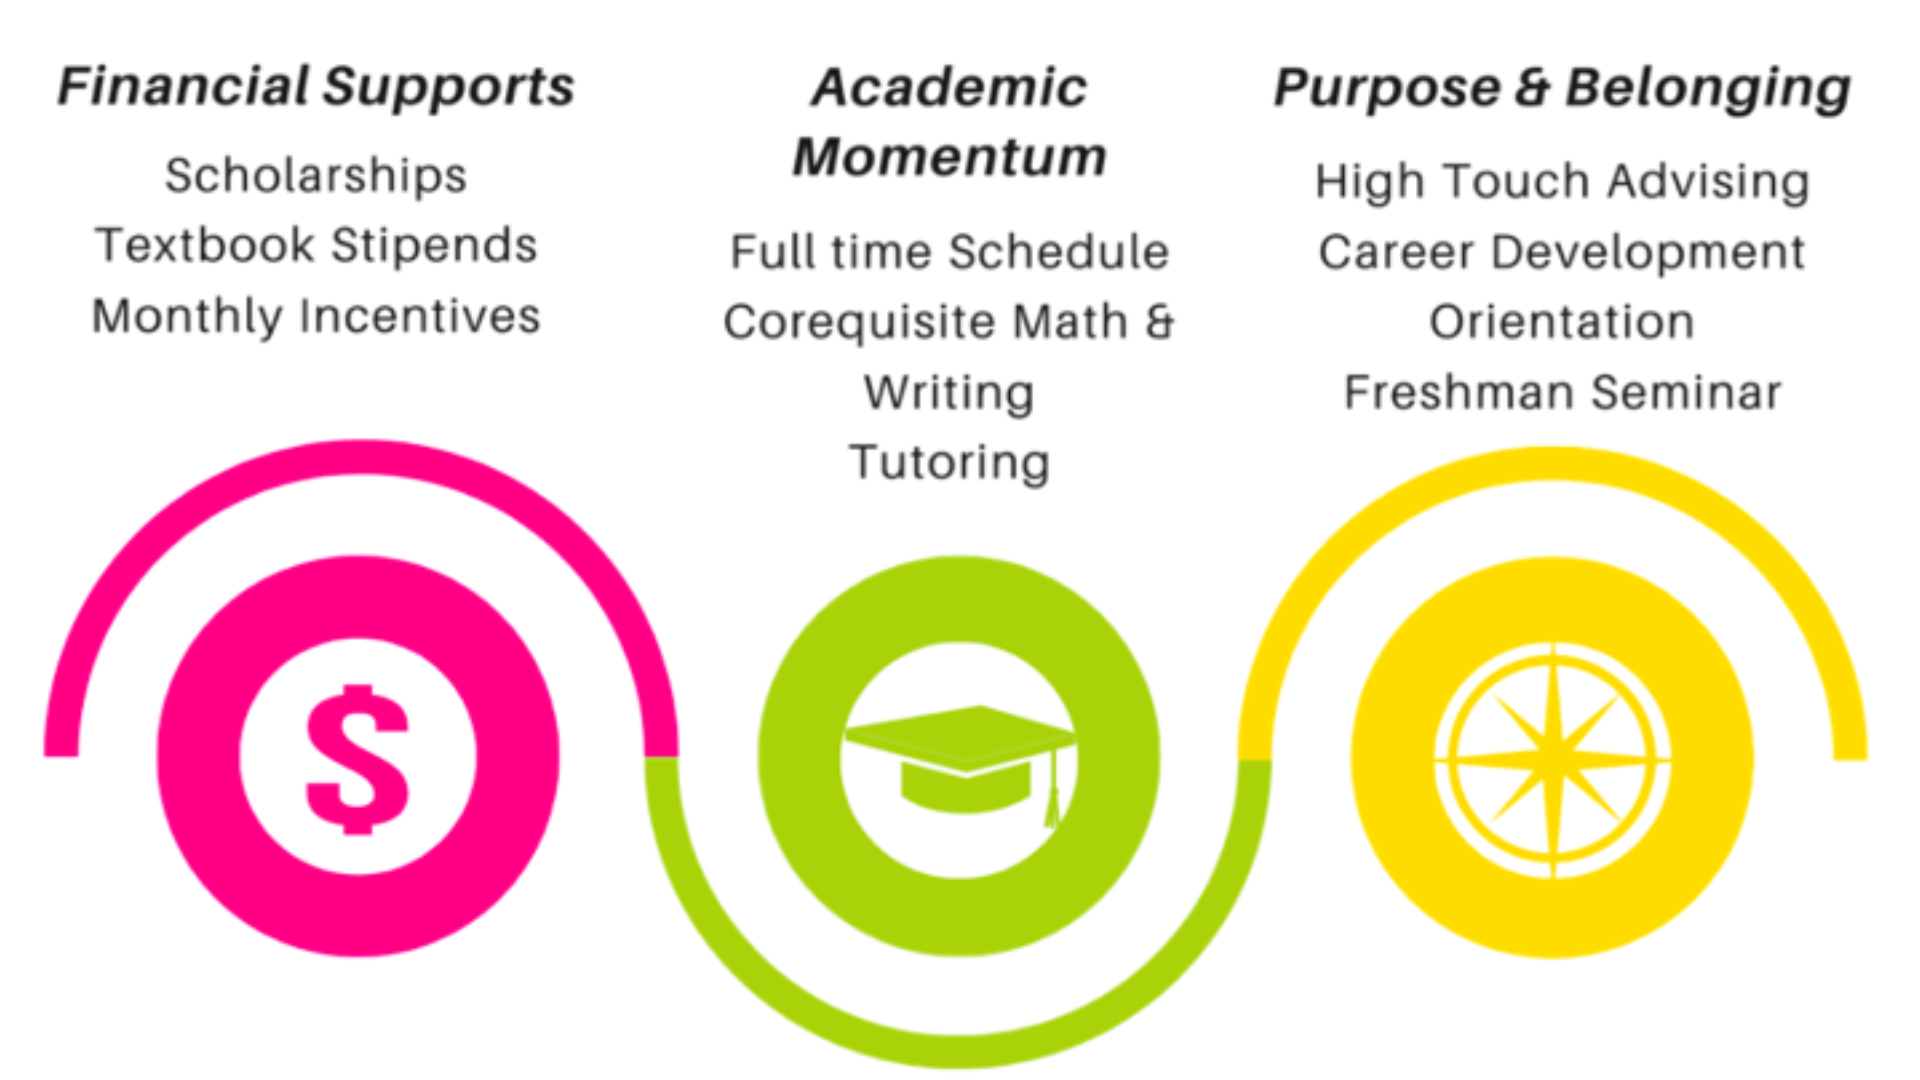 3 main support graphic displaying 3 circles illustrating financial support, academic momentum, purpose and belonging 